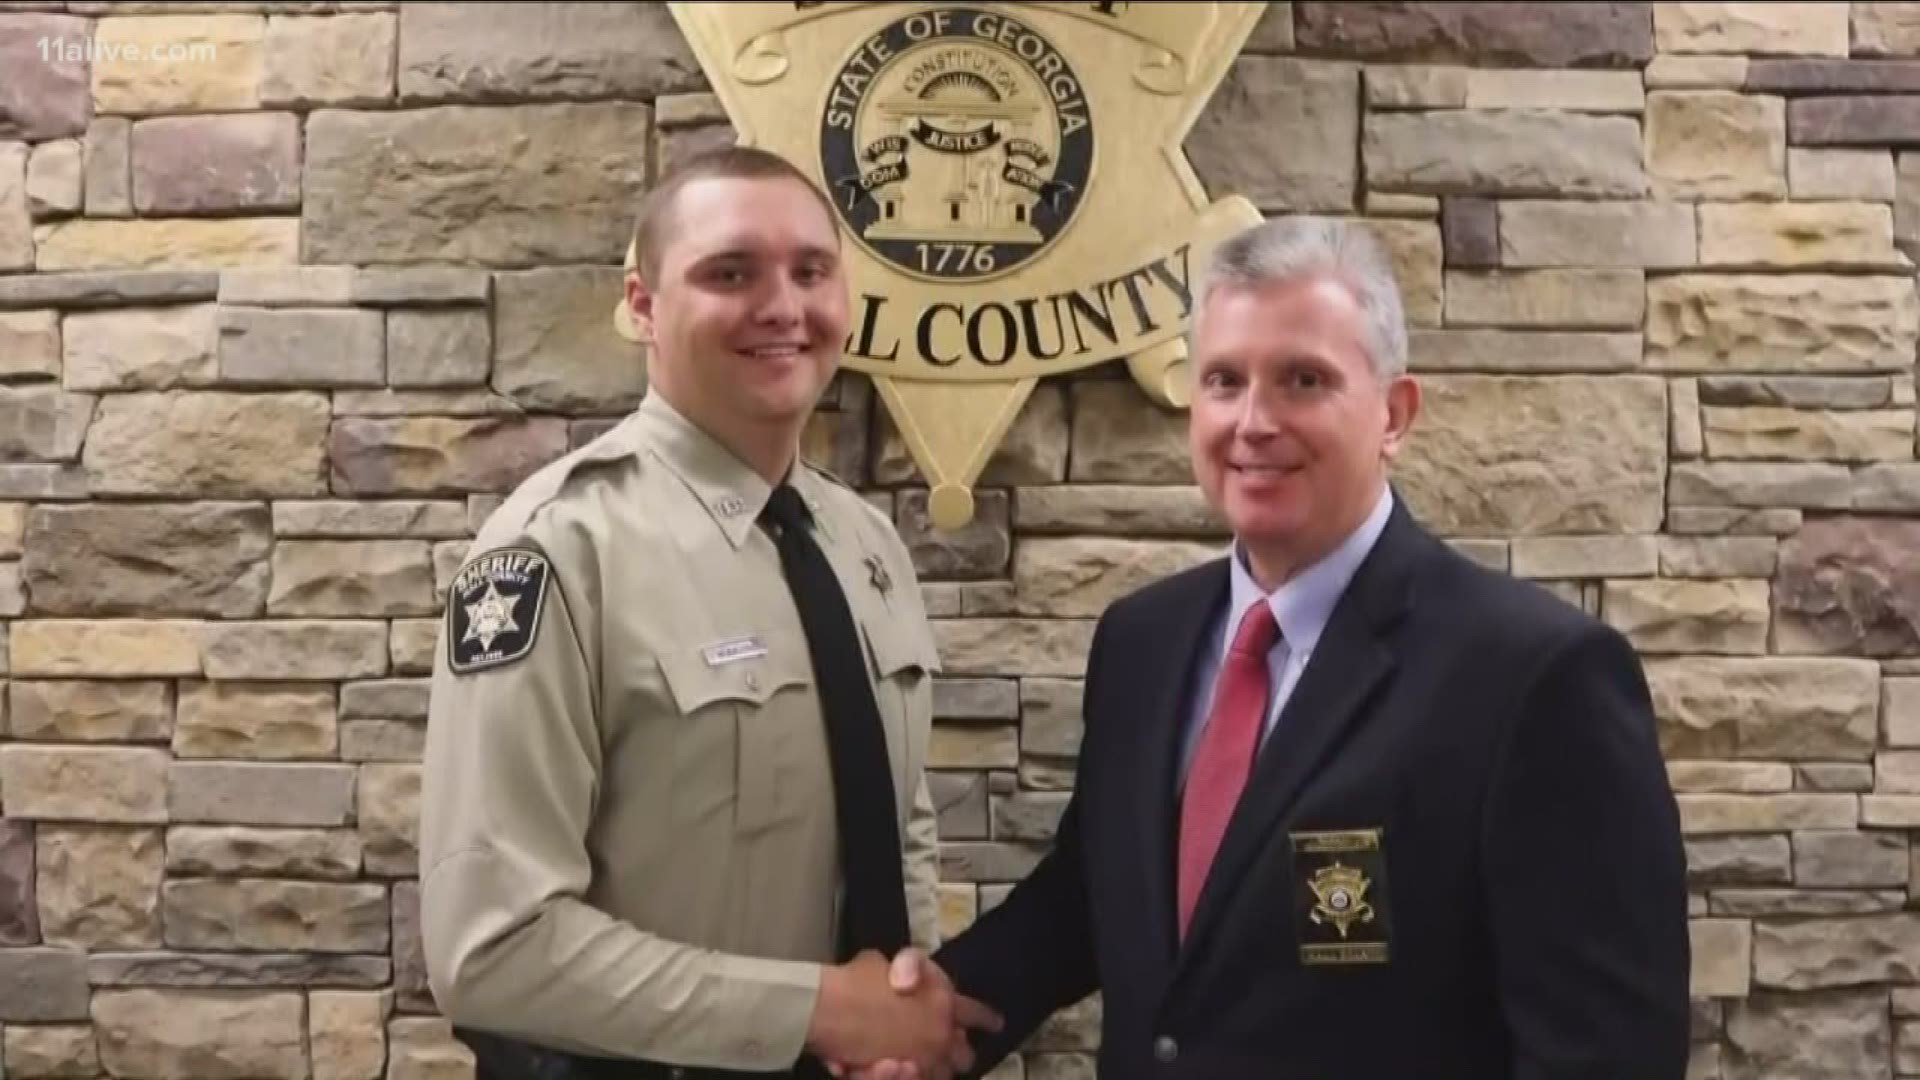 Amid the grief and unanswered questions, a Hall County deputy